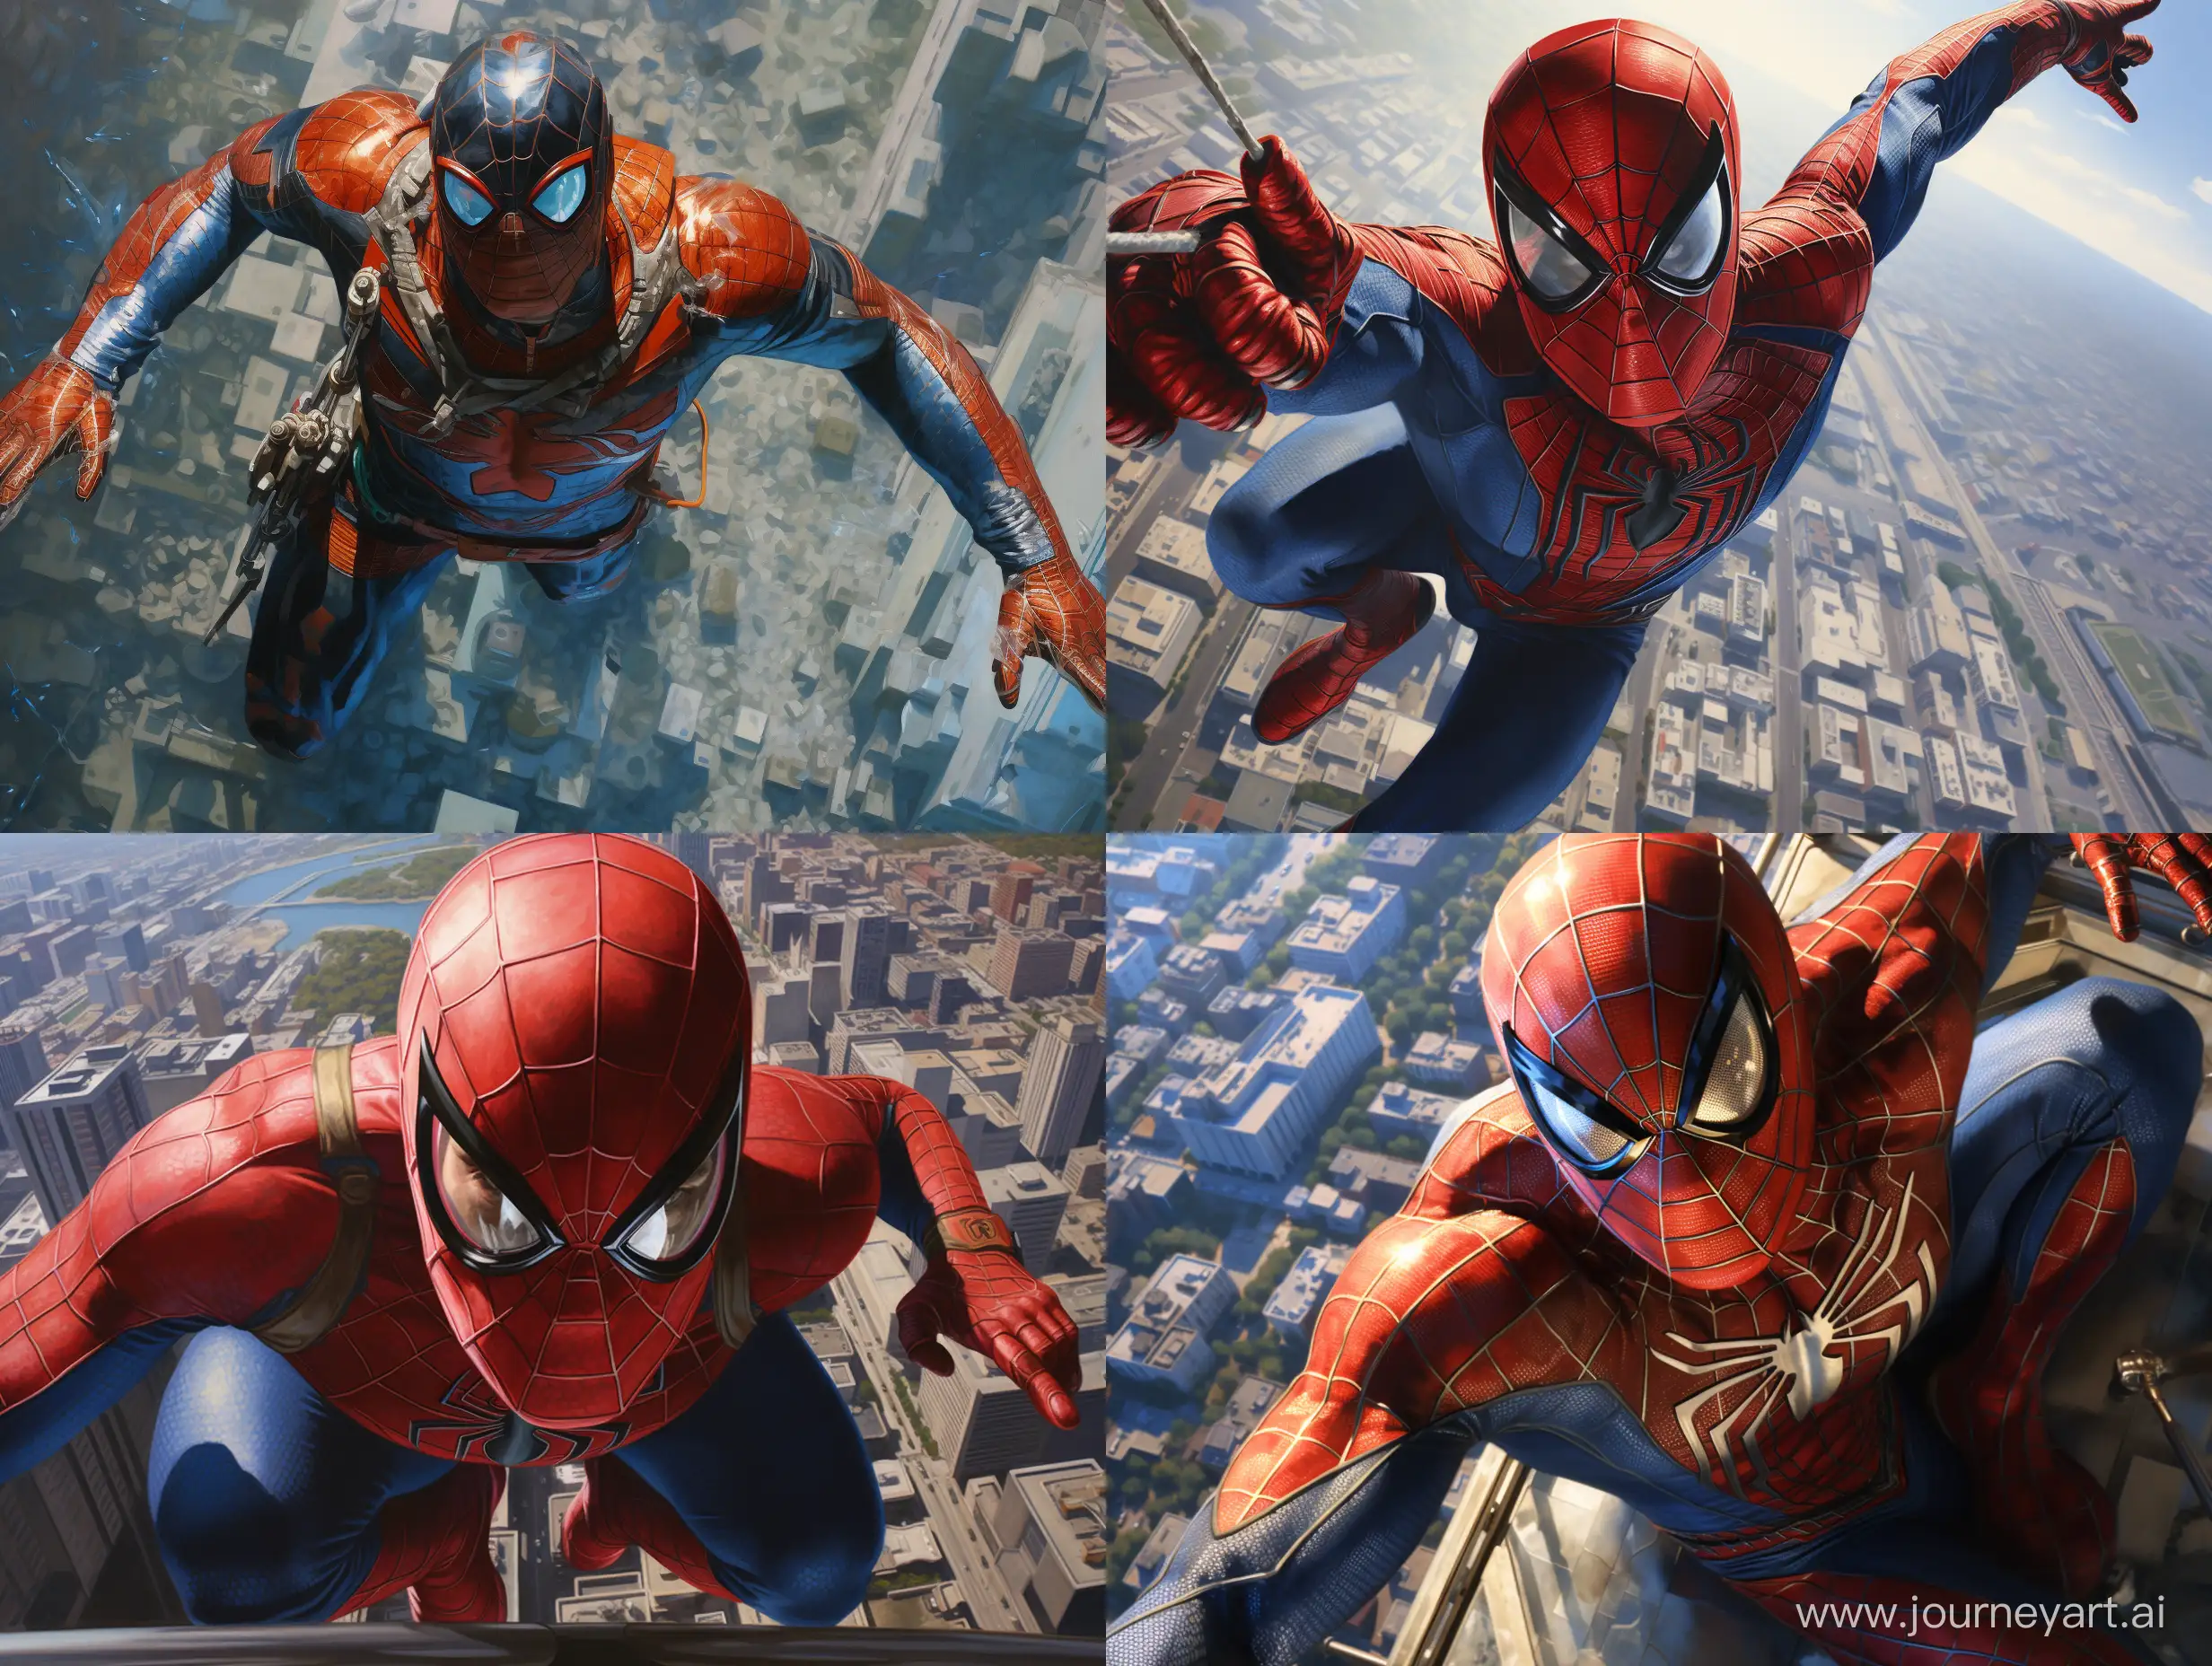 Spiderman-Free-Fall-Spectacular-Aerial-Descent-from-Skyscraper